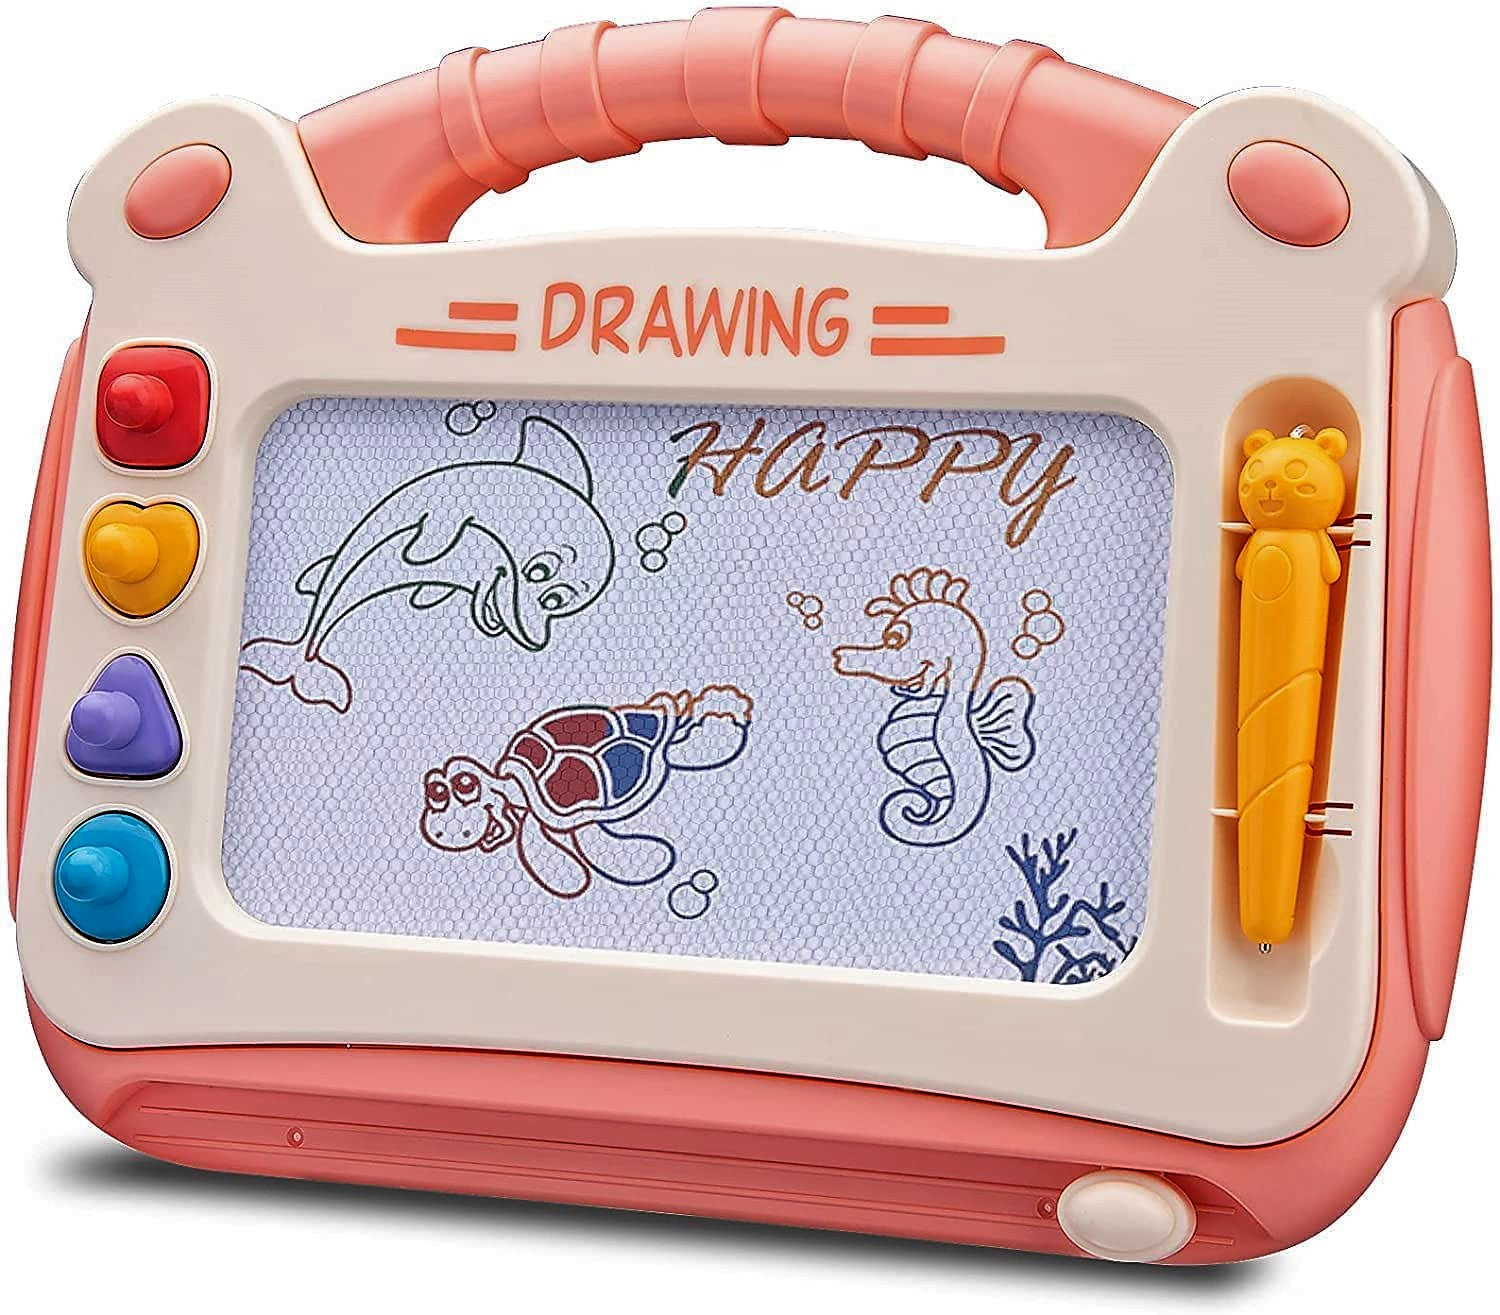 2 x Magic Writer Magnetic Writing Drawing Slate Board Doodle Pad Kids Gift  Toy